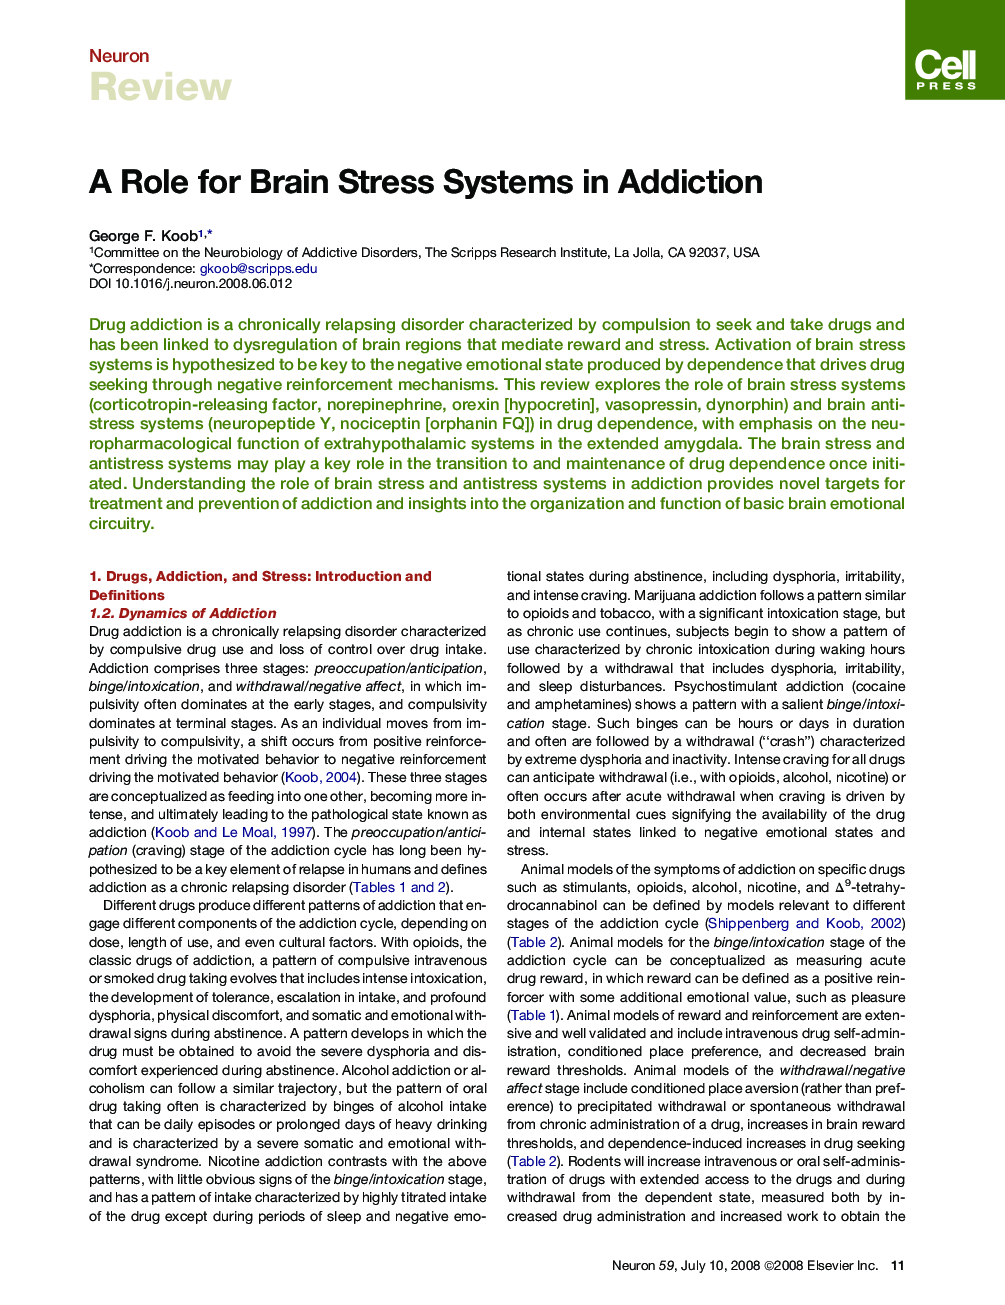 A Role for Brain Stress Systems in Addiction